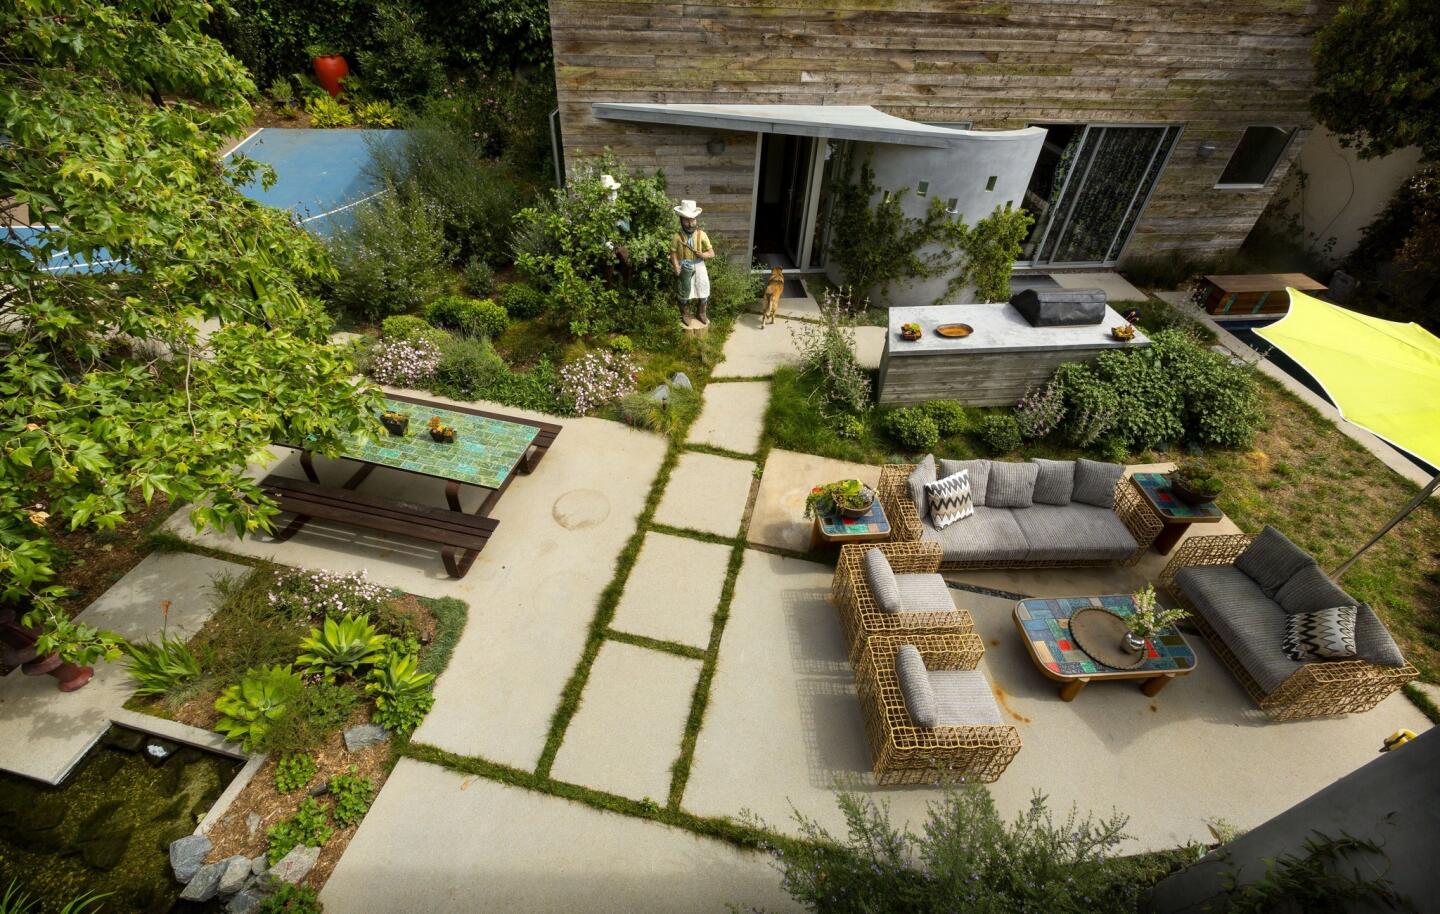 A natural beauty in Rustic Canyon